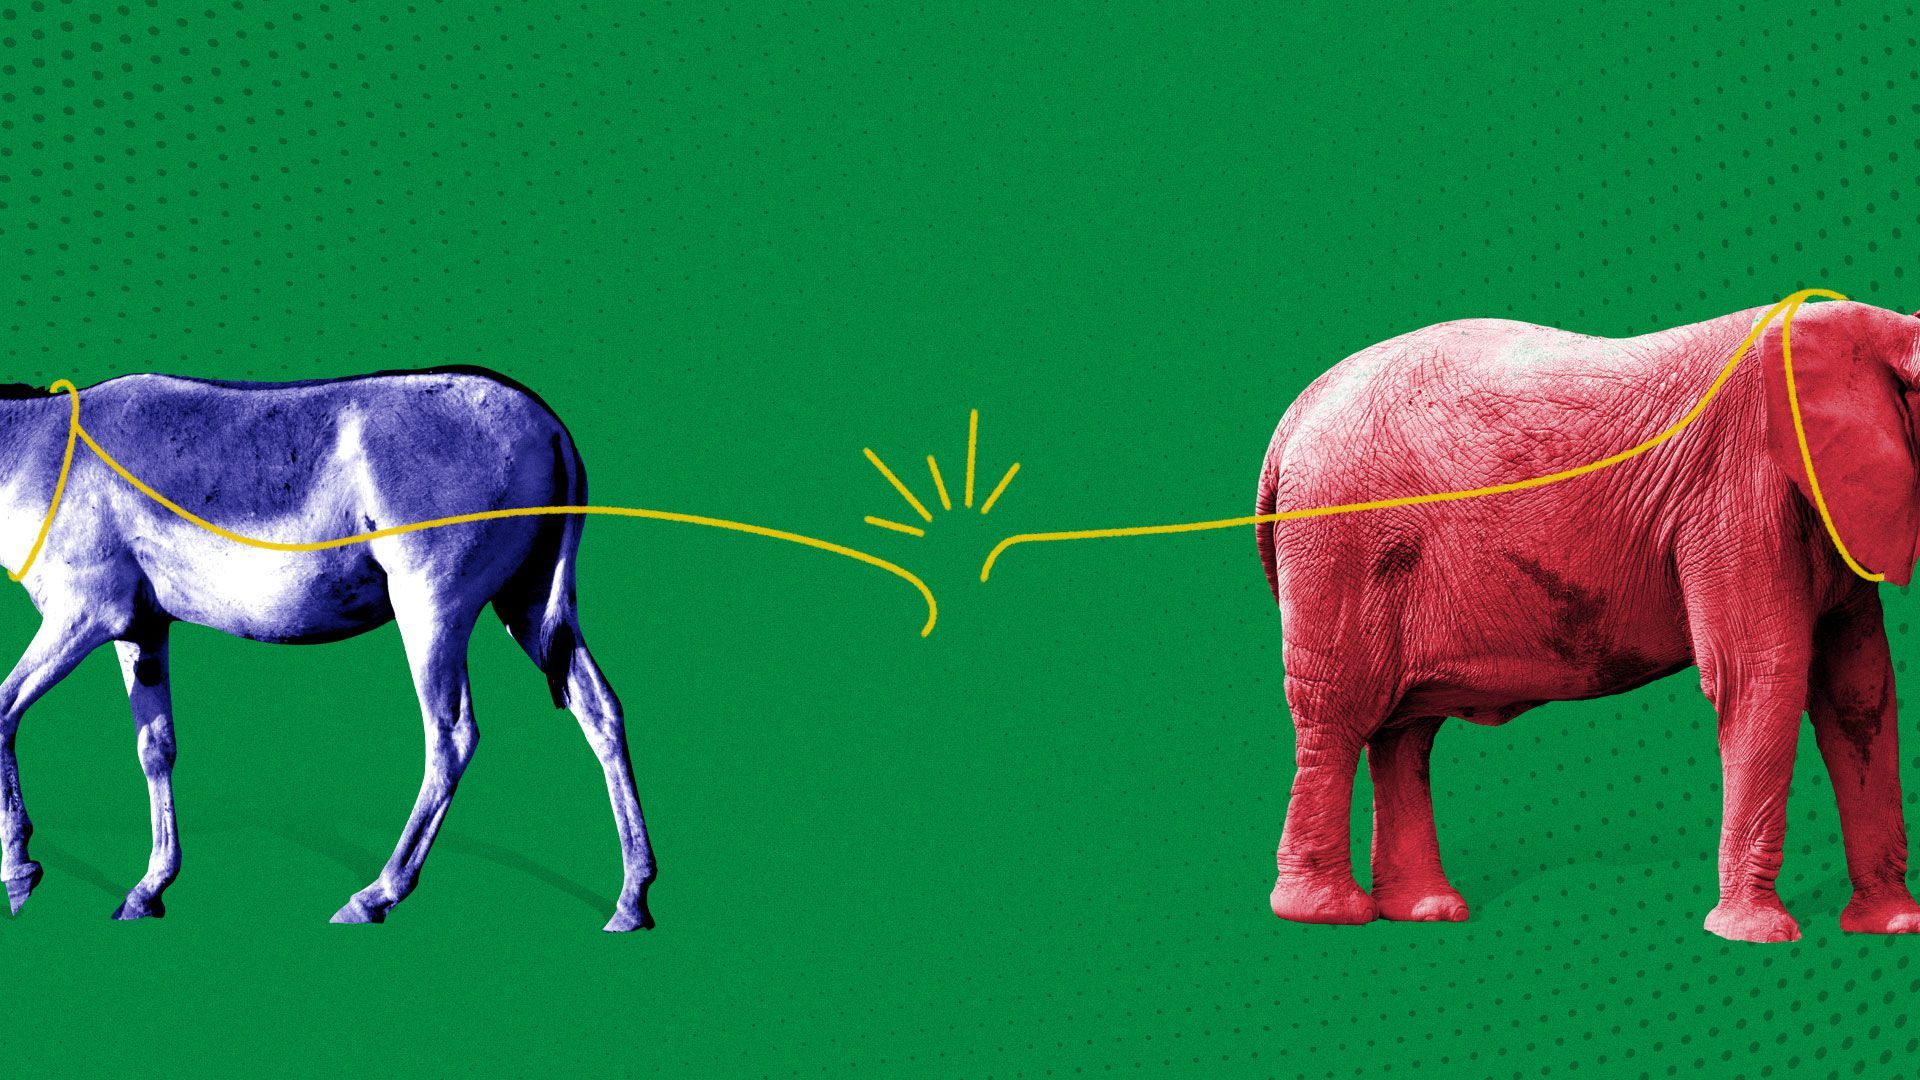 Illustration of a donkey and elephant walking away from one another and breaking the tethered line